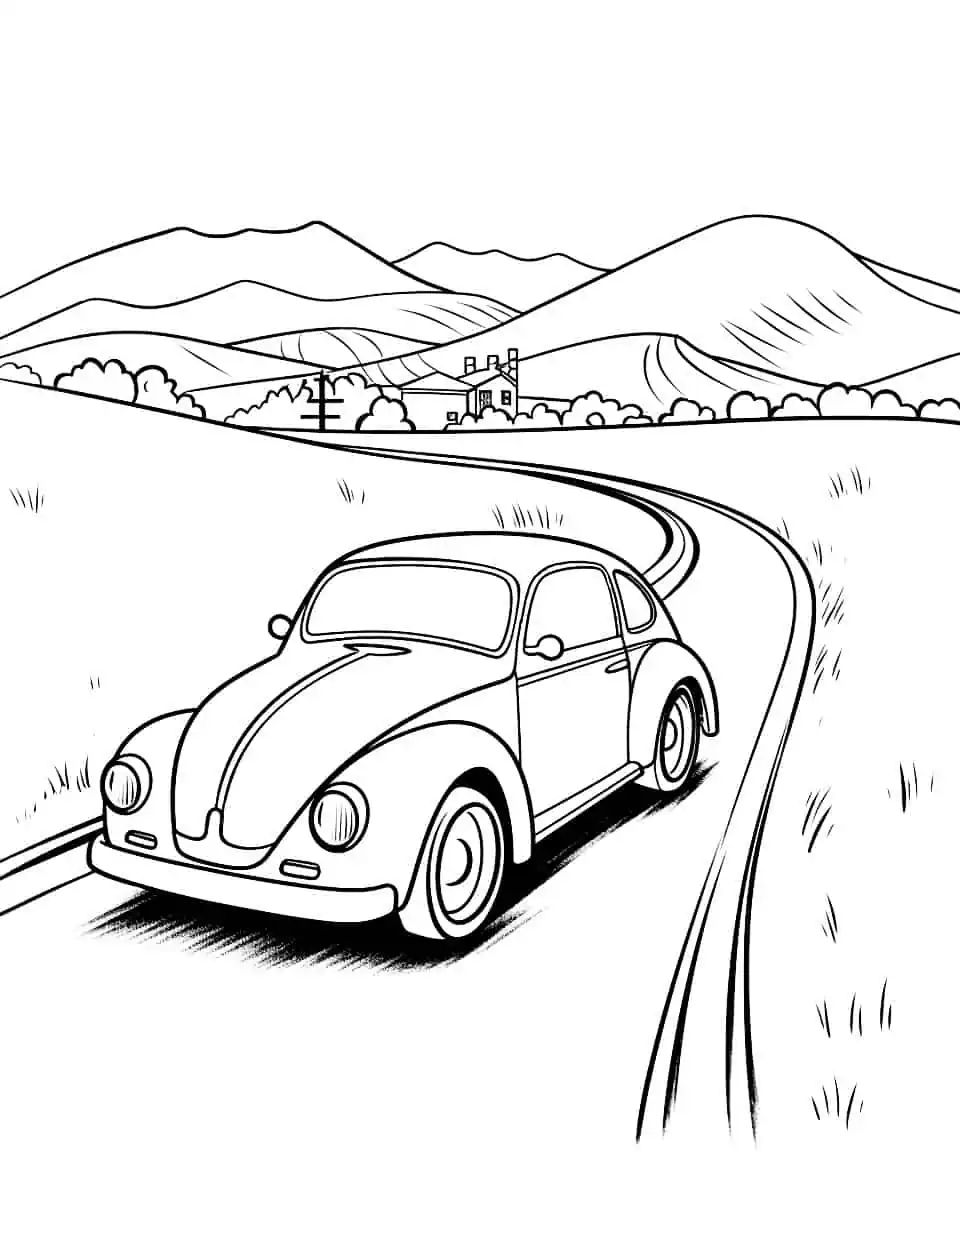 Cool Coupe Car Coloring Page - A cool coupe racing on a winding country road.